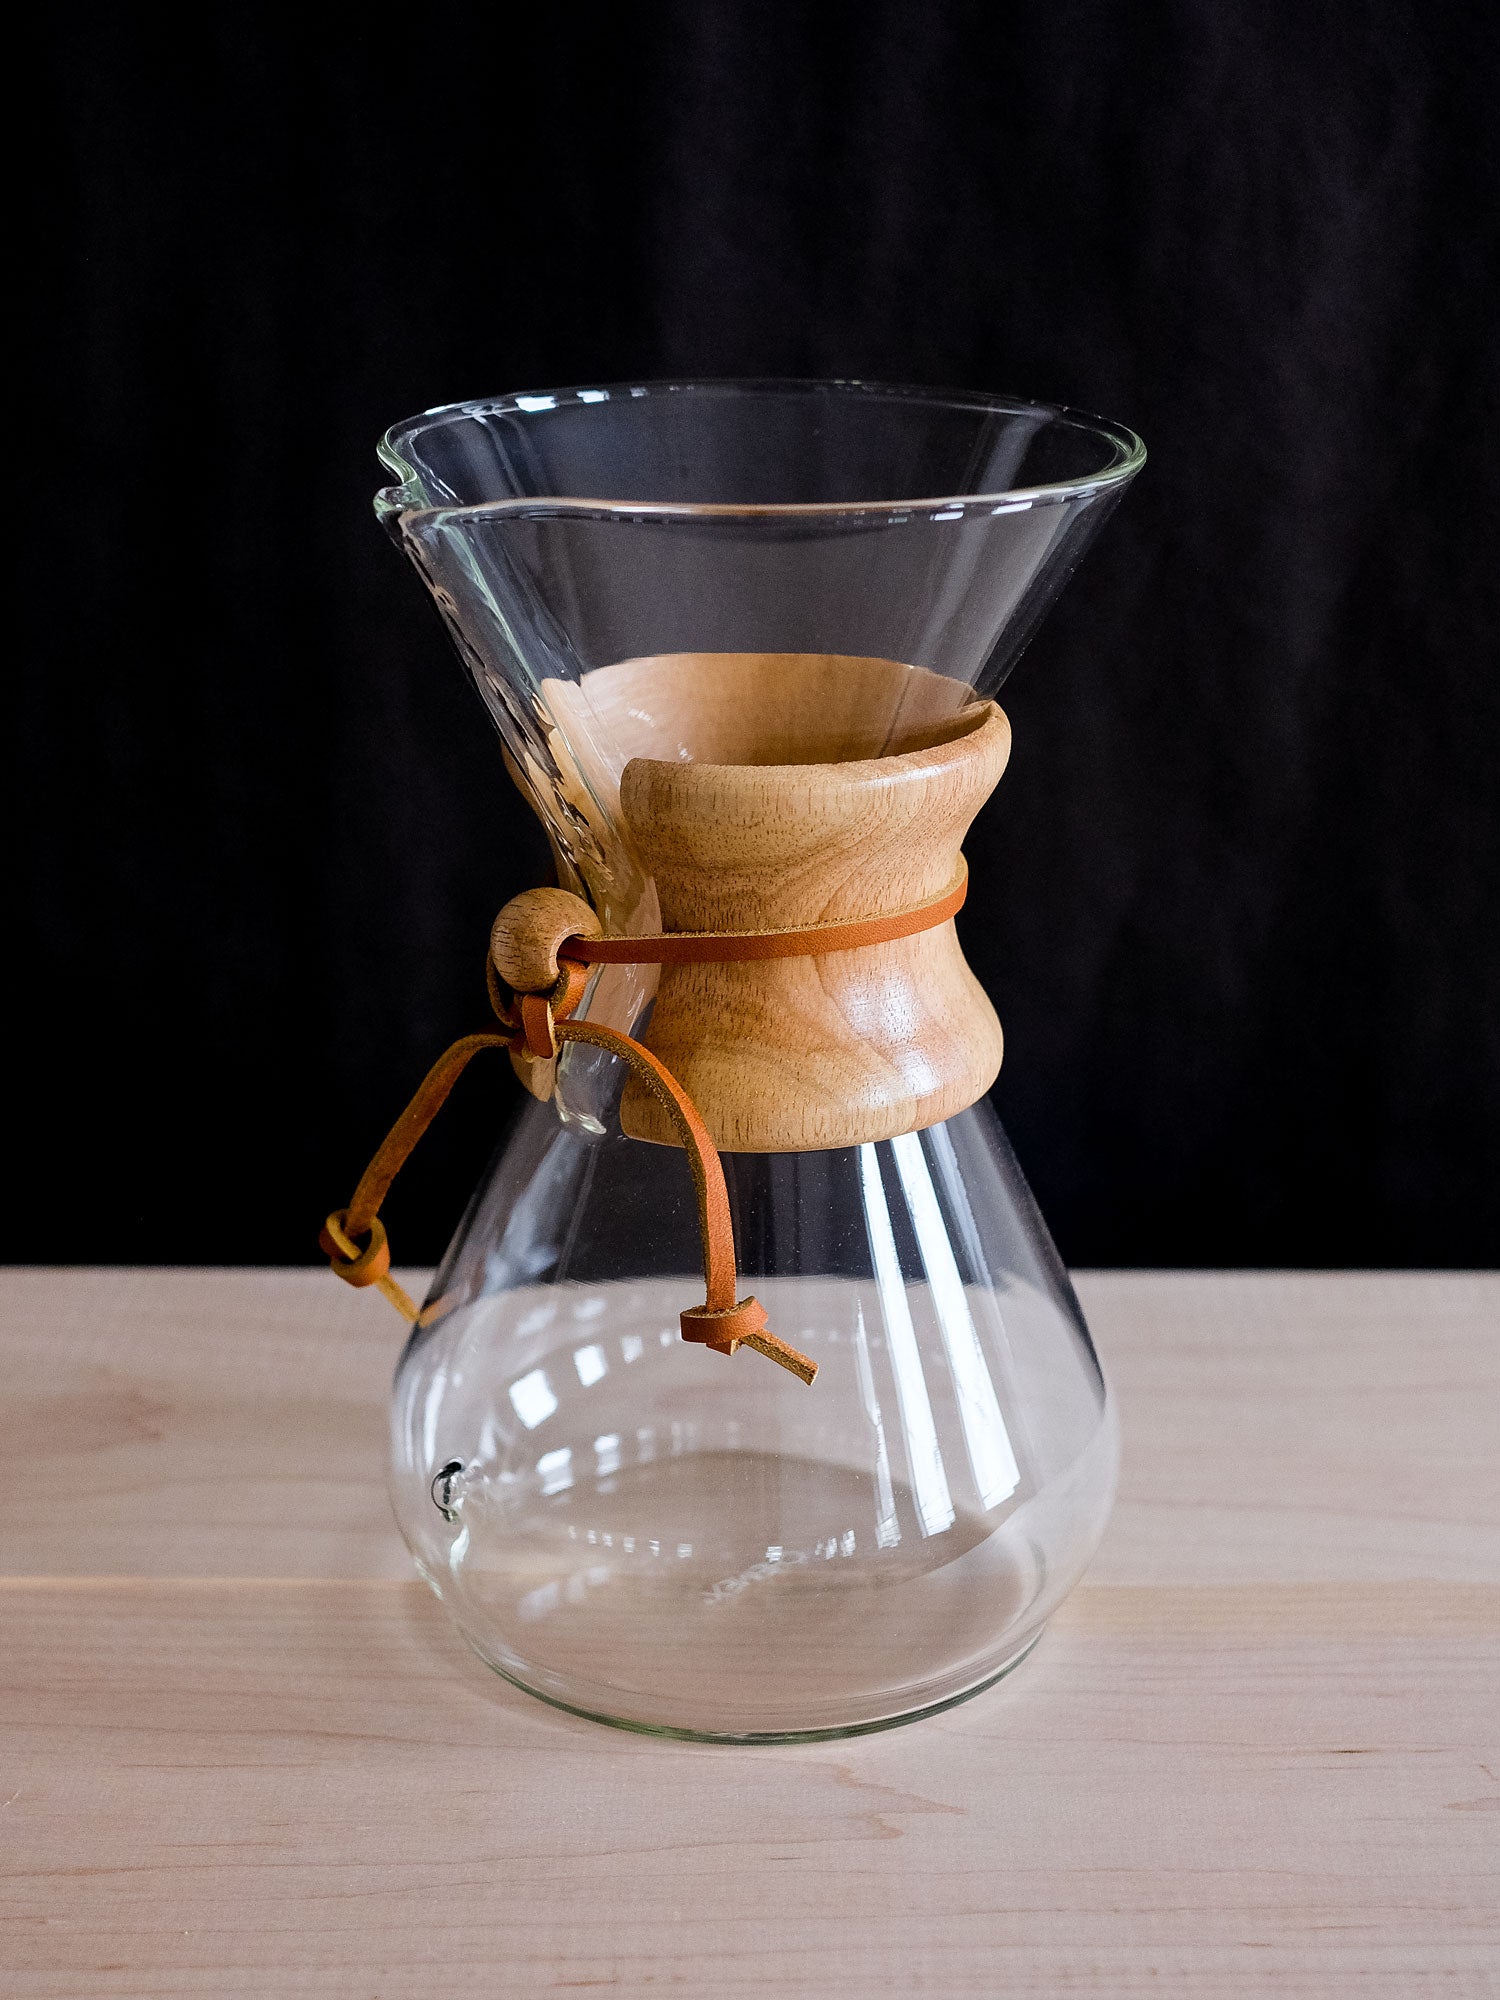 8 cup Chemex - Whisk